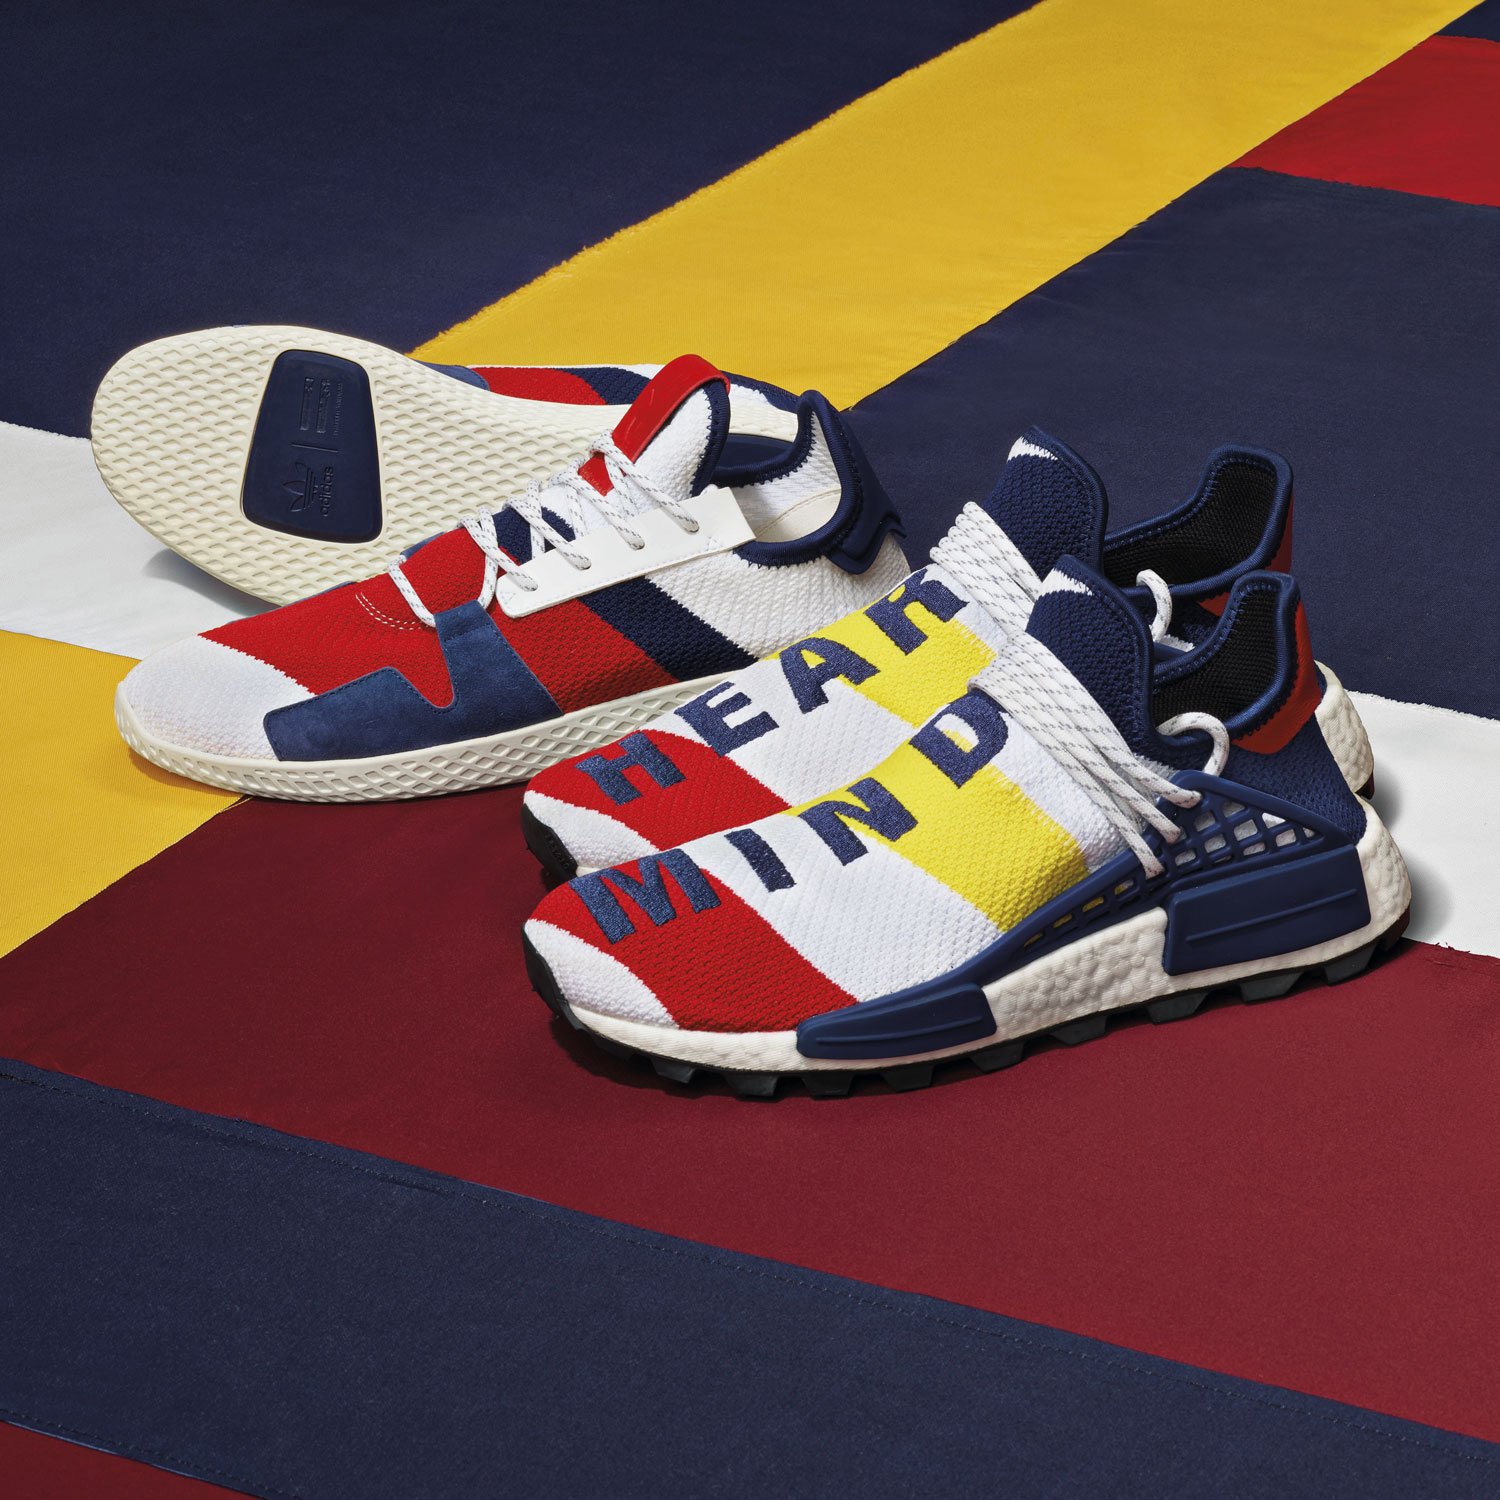 on Twitter: "The BBC Pharrell Williams x adidas Hu are a limited edition collaboration between adidas, Pharrell &amp; Billionaire Boys Club. Available on 20th october online and in